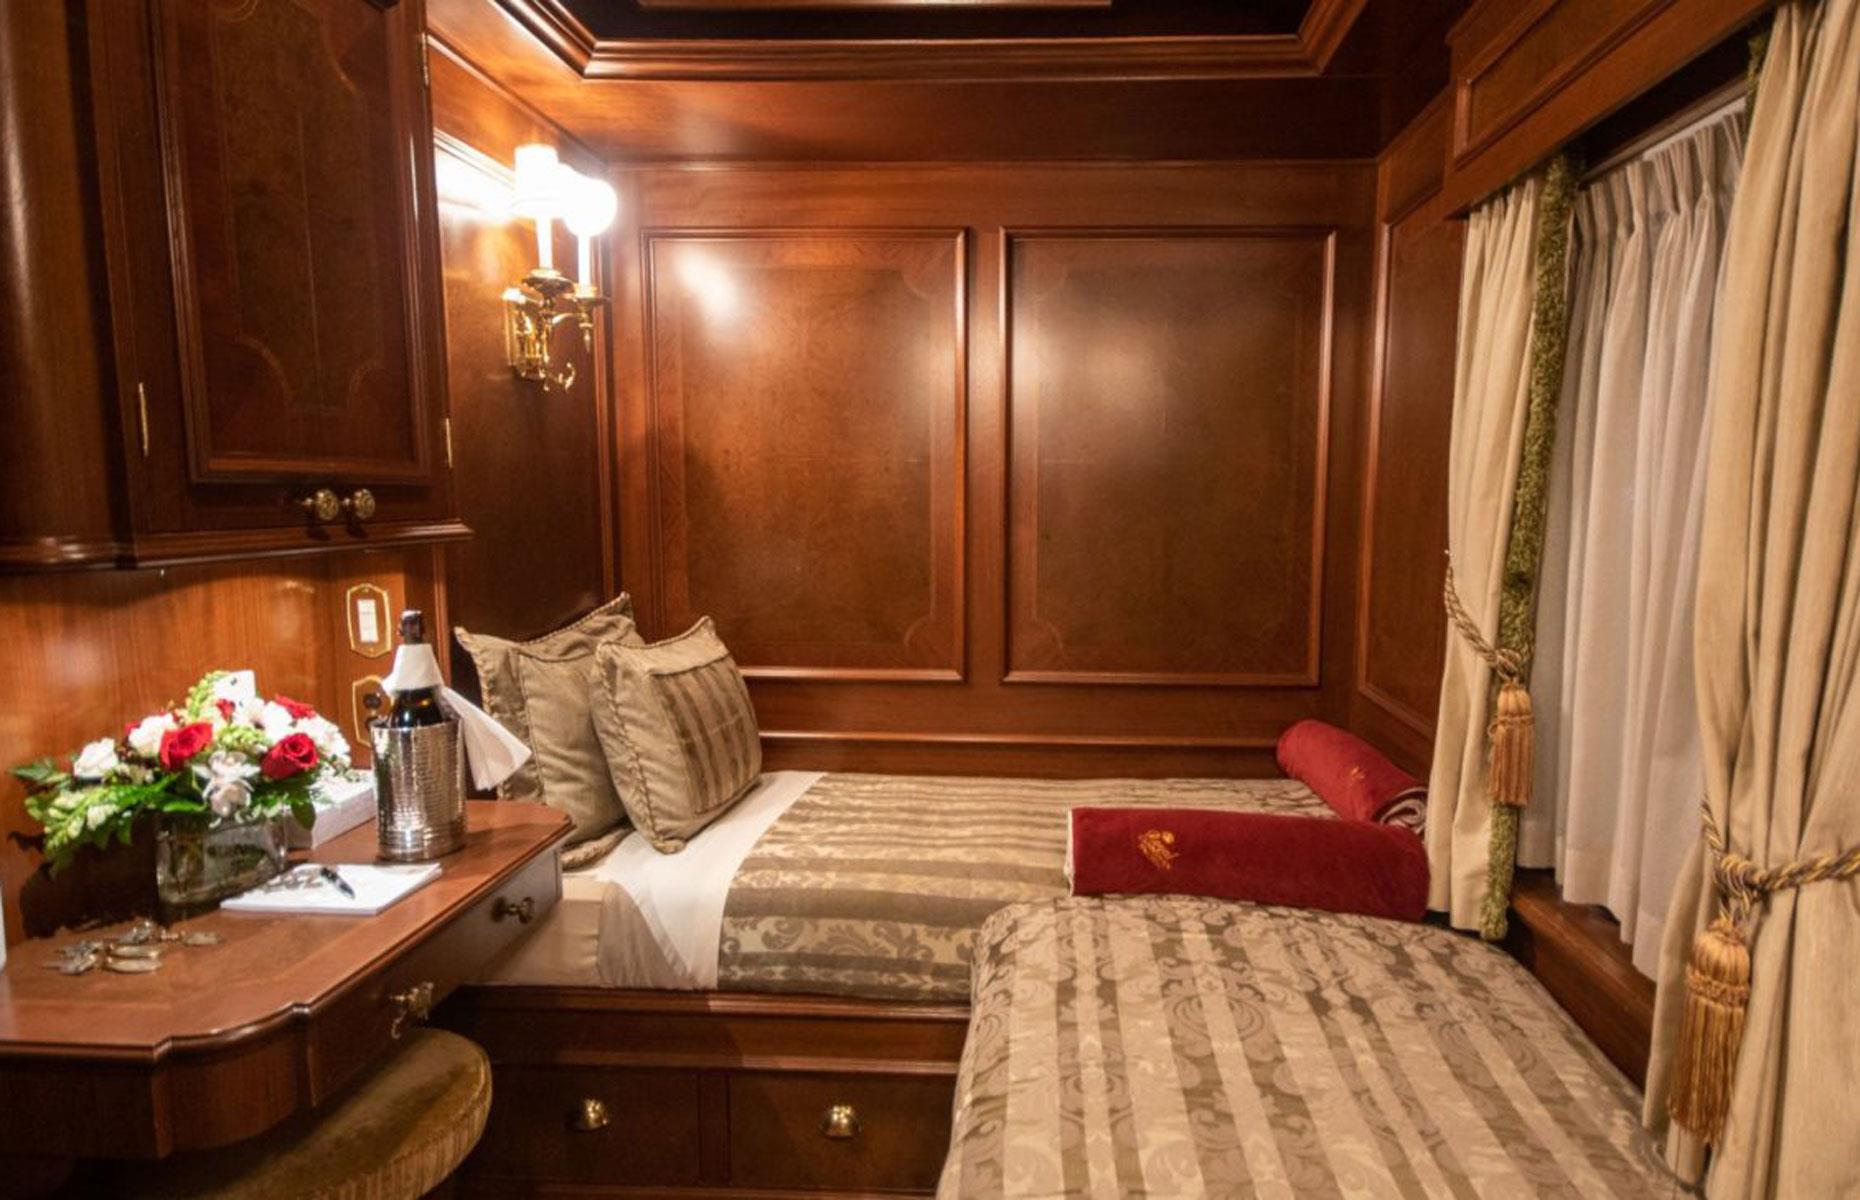 <p>Guests aboard this "five-star hotel on wheels" are treated like royalty and can dine from a locally and ethically sourced menu that boasts specialties such as caviar and Alberta venison, not to mention the most prized Canadian wines.</p>  <p>The staterooms are every bit as luxurious as you'd expect. Each features its own indulgent amenities, including a three-piece ensuite bathroom.</p>